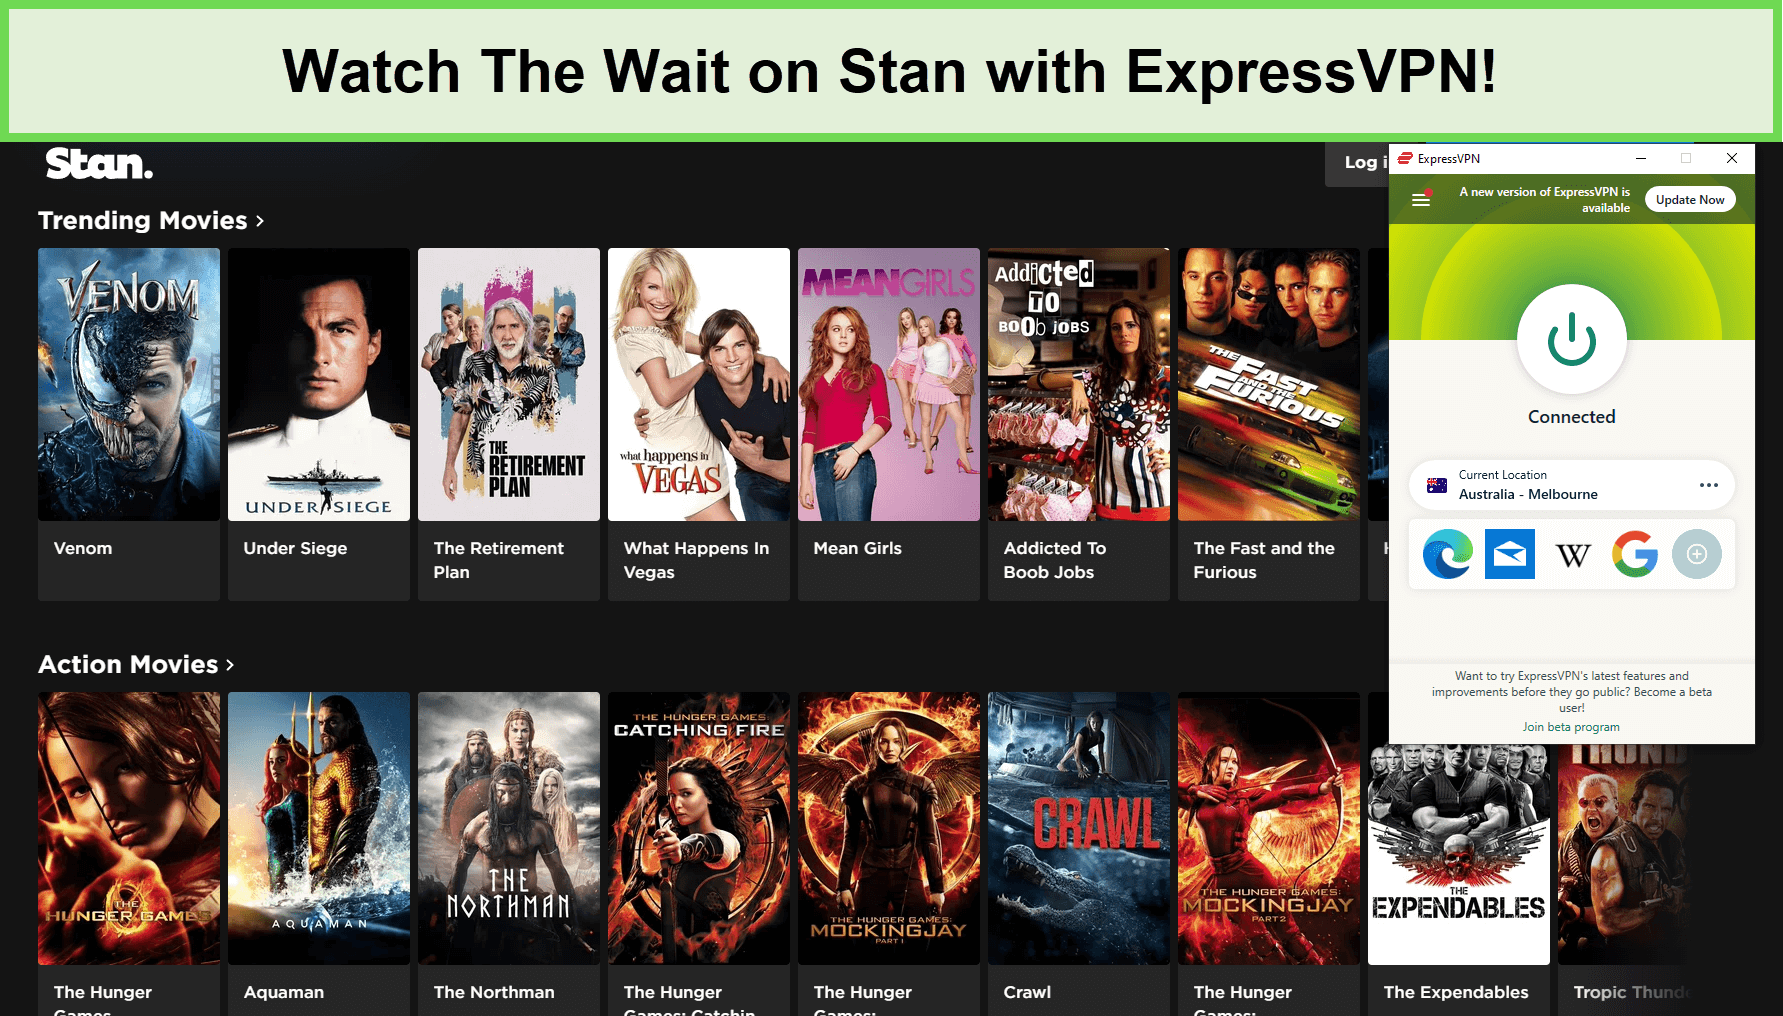 Watch-The-Wait-in-France-on-Stan-with-ExpressVPN